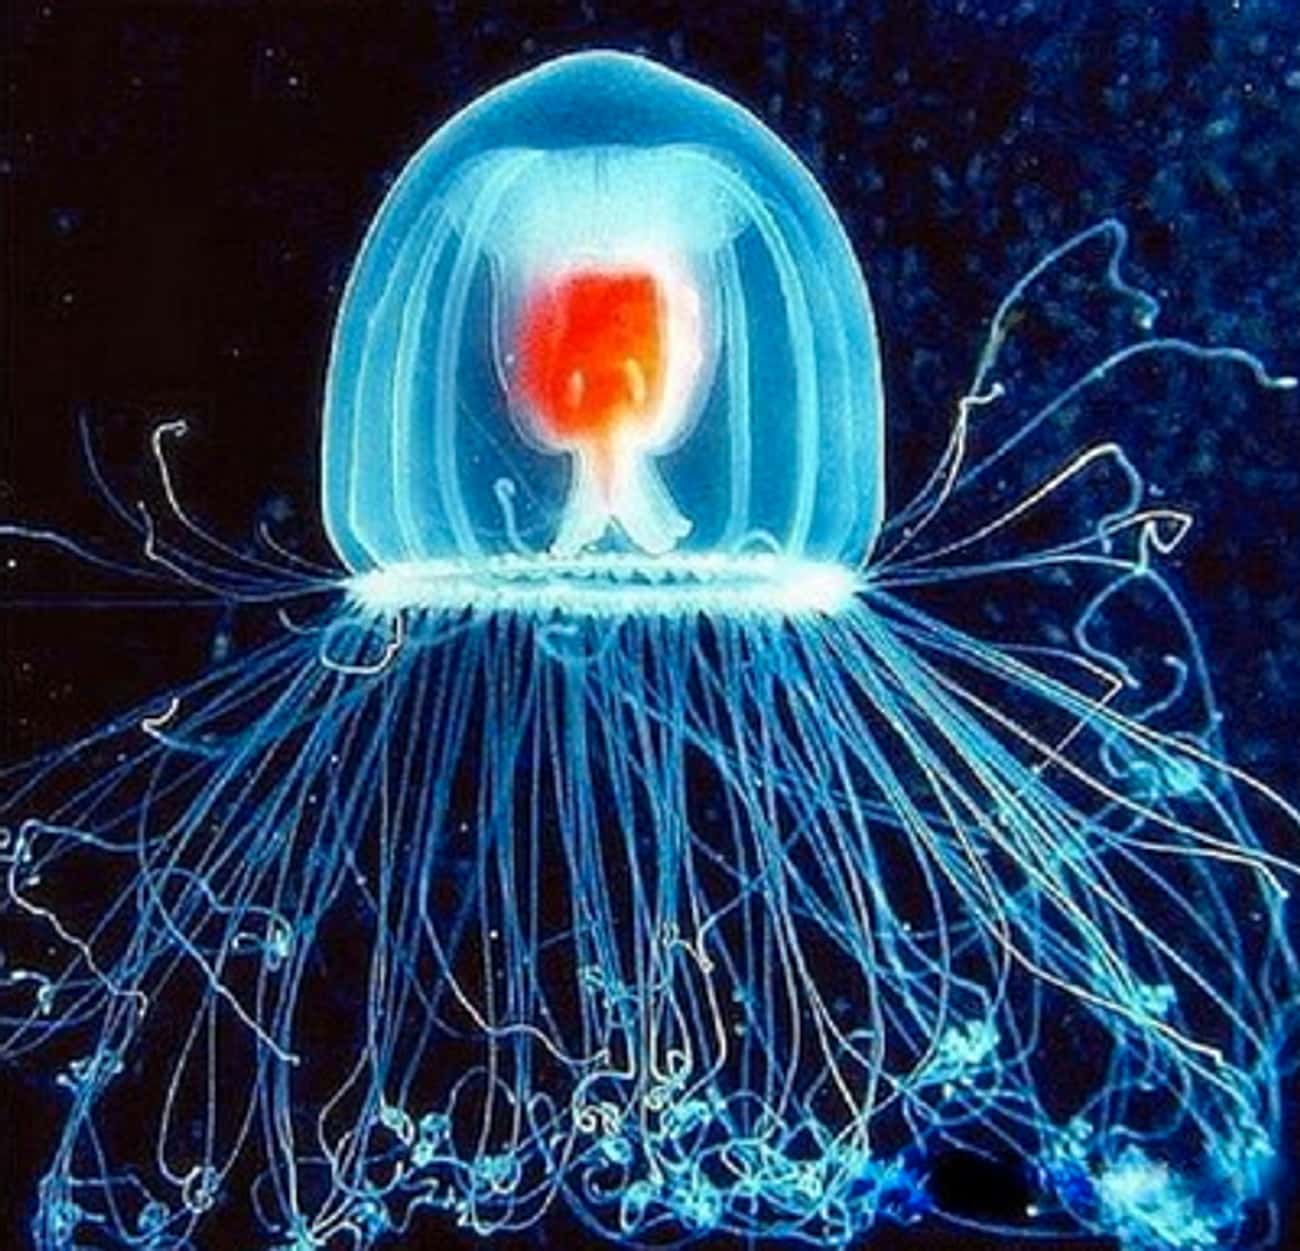 The Turritopsis Dohrnii Jellyfish Is Going to Live Forever